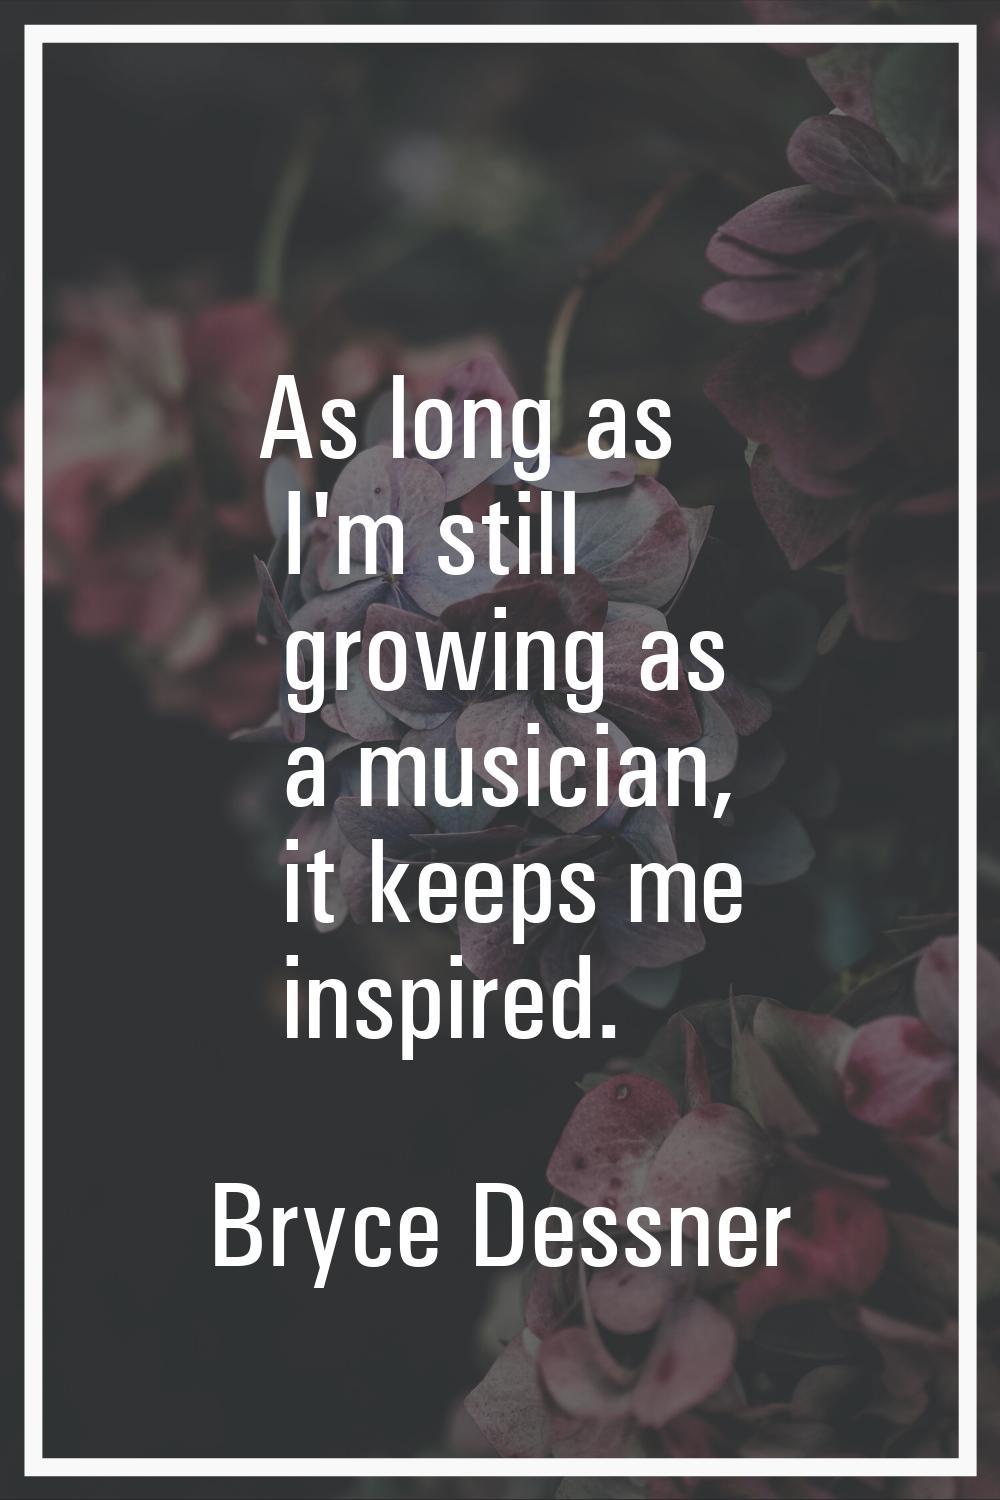 As long as I'm still growing as a musician, it keeps me inspired.